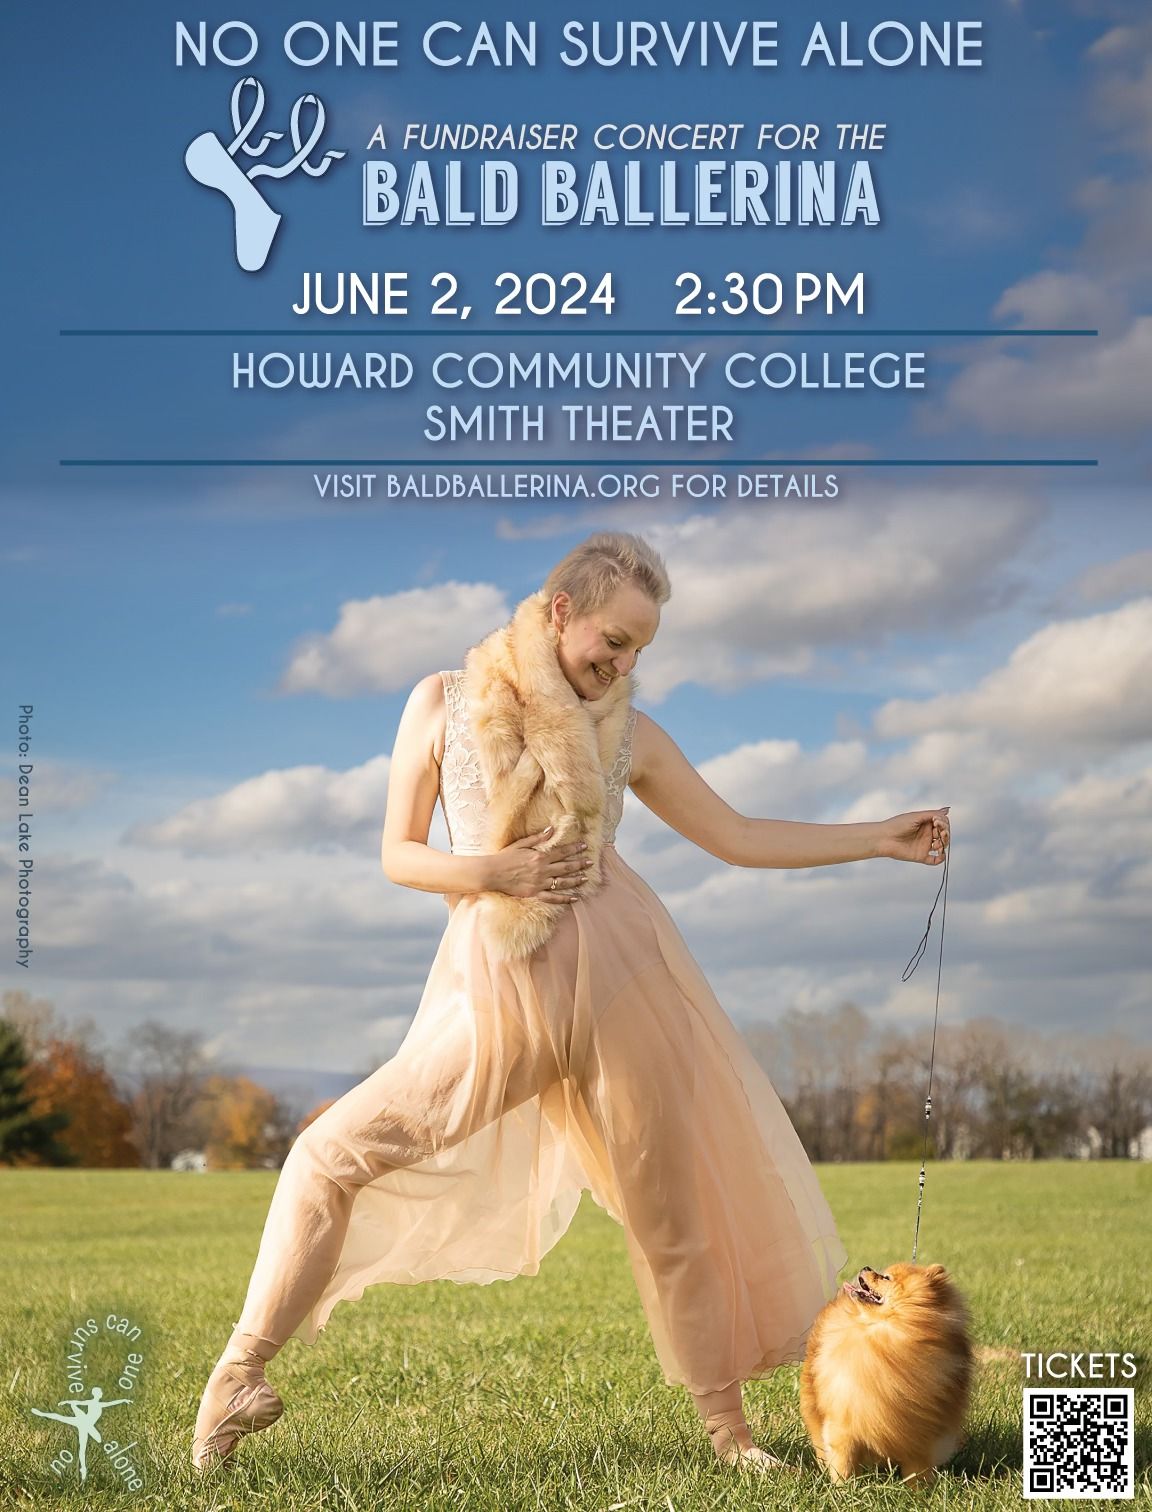 9th Annual No One Can Survive Alone Fundraiser Concert for Bald Ballerina